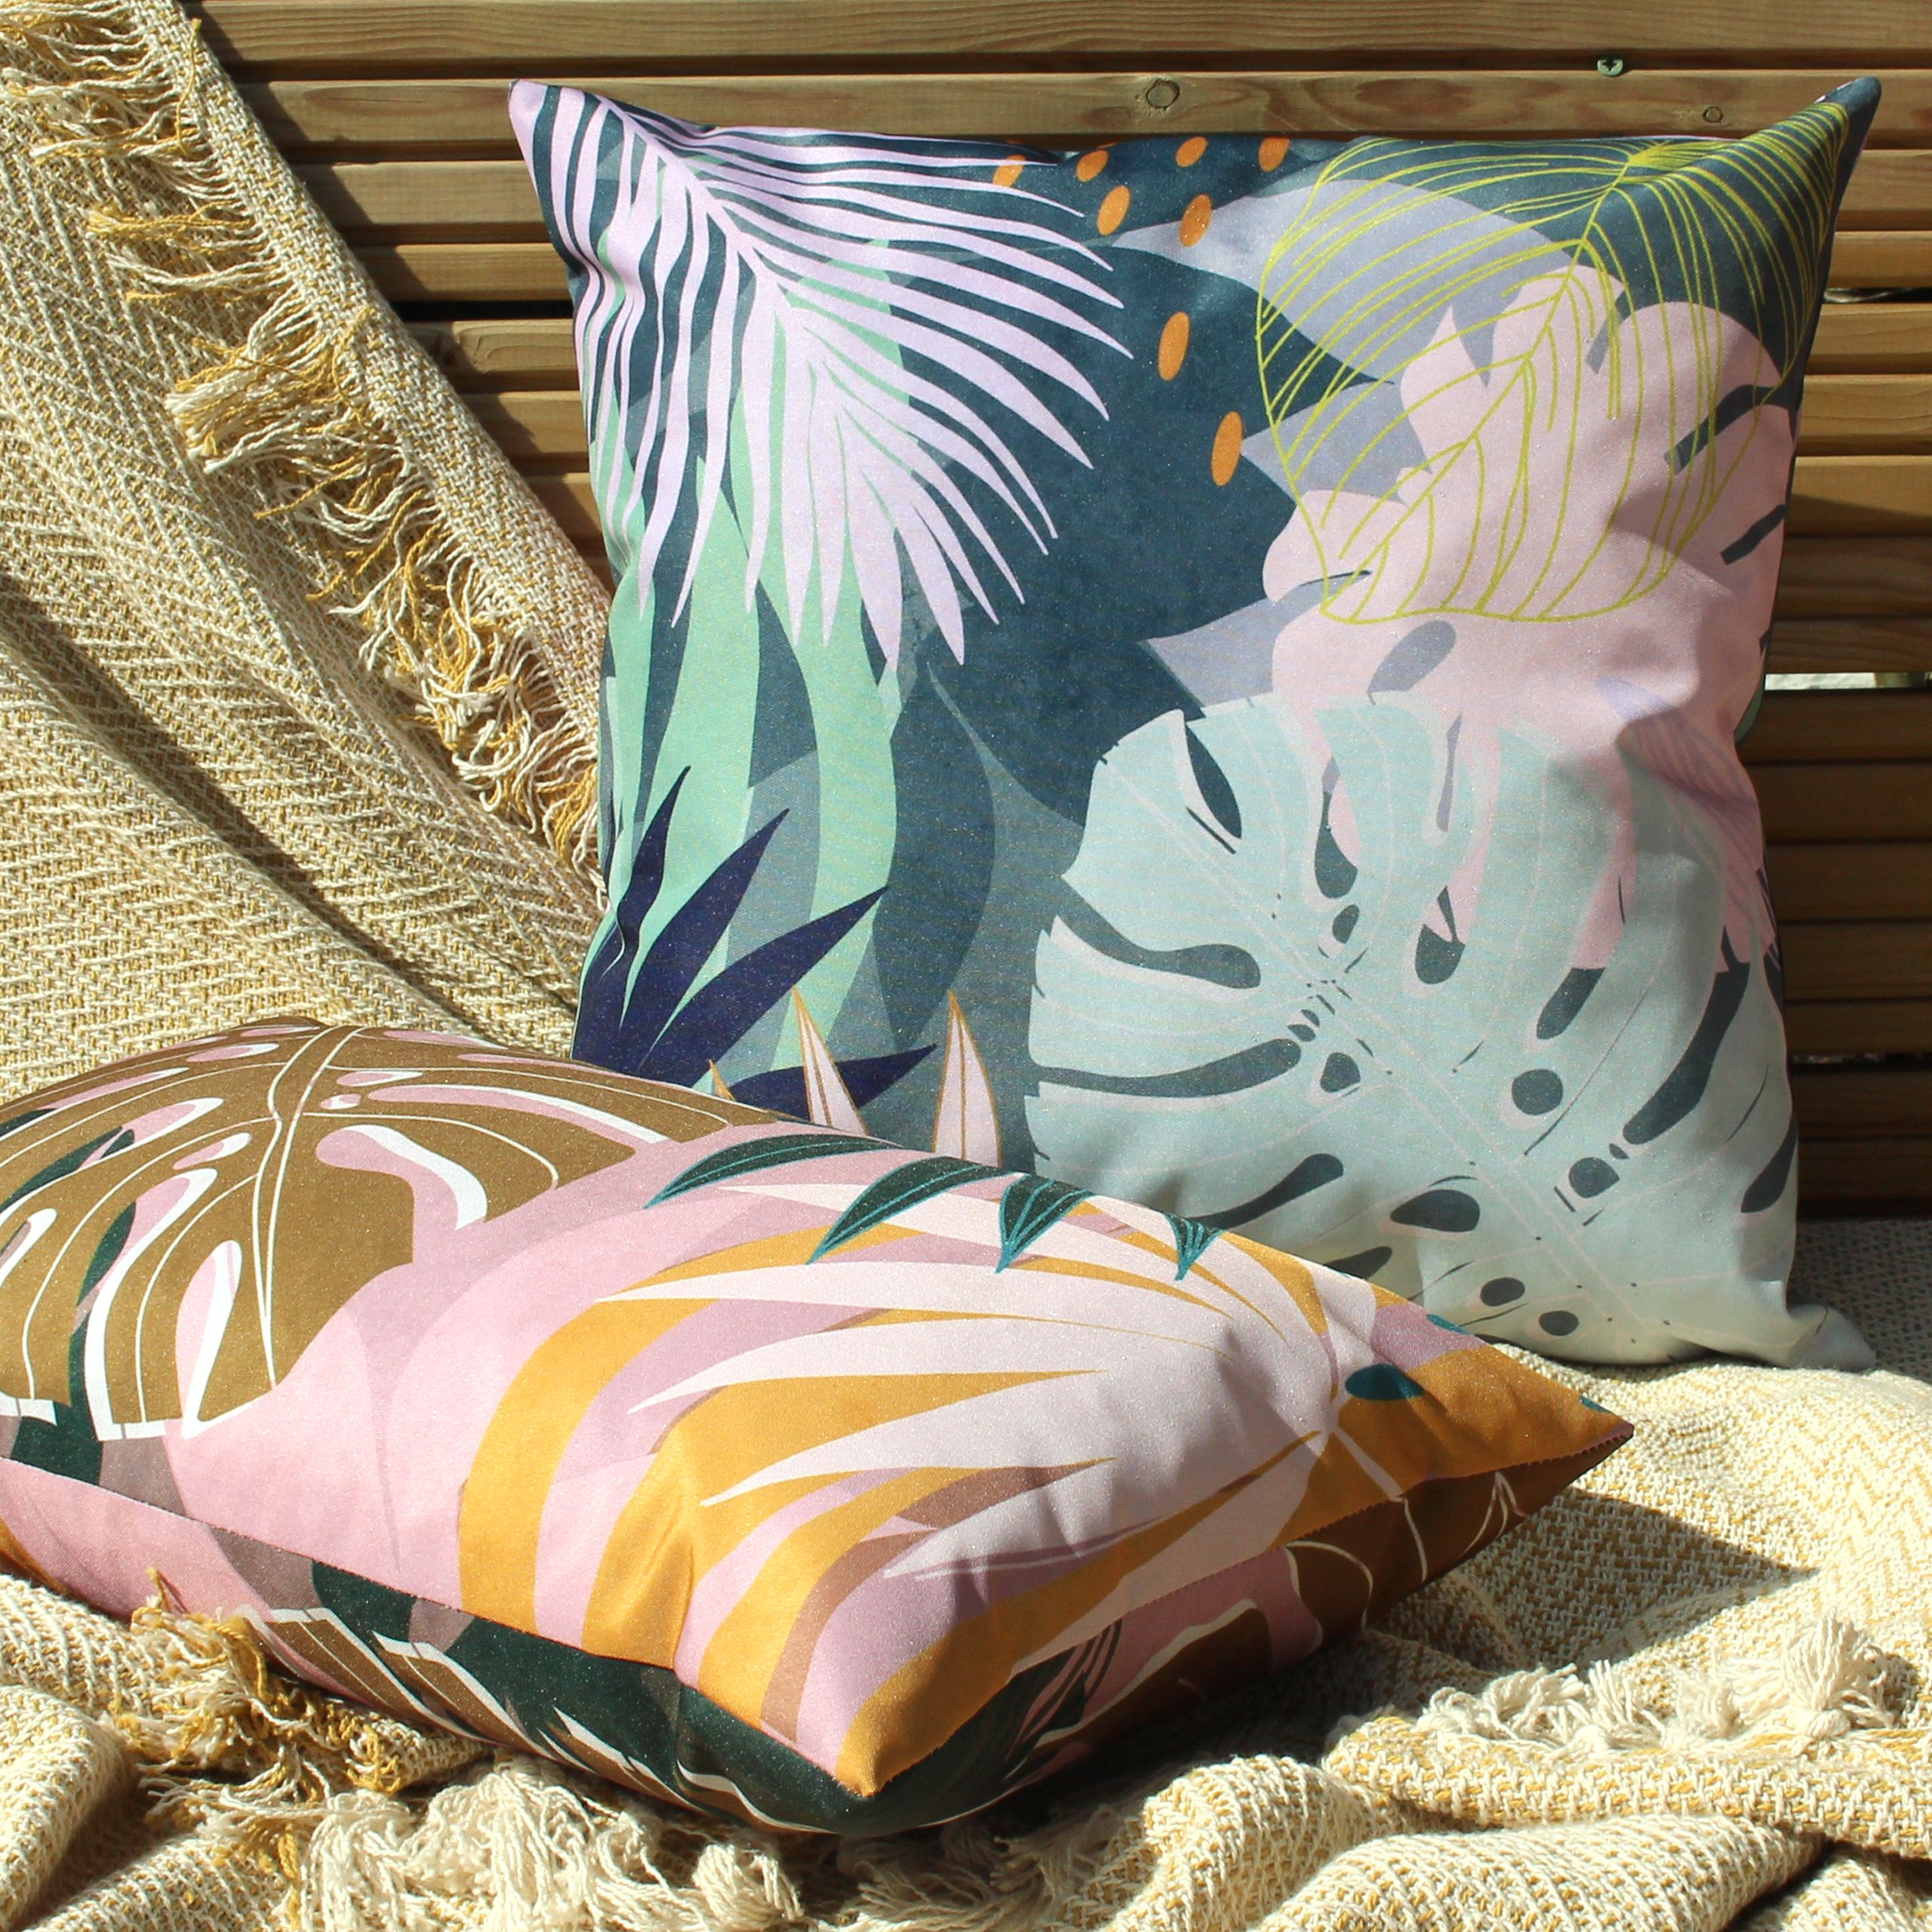 Featuring a bold and abstract design of palm leaves. This fully reversible design in pastel pinks and bright green's will instantly freshen up your outdoor space.